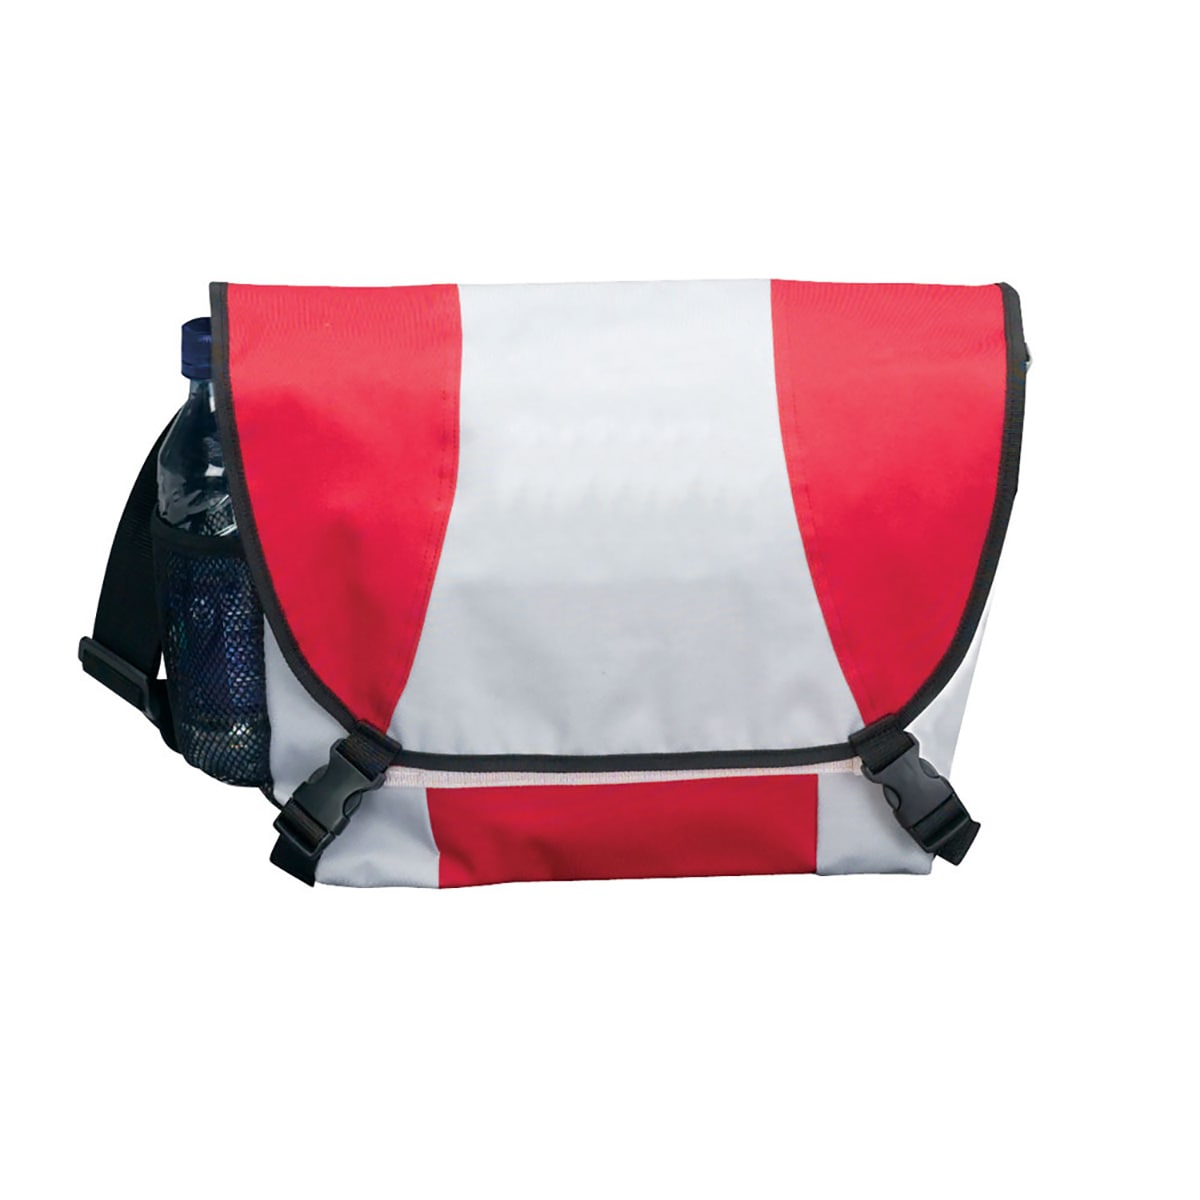 Goodhope Light Weight School Travel Flap Over Unisex Accessories Messenger Bag Red - image 1 of 4